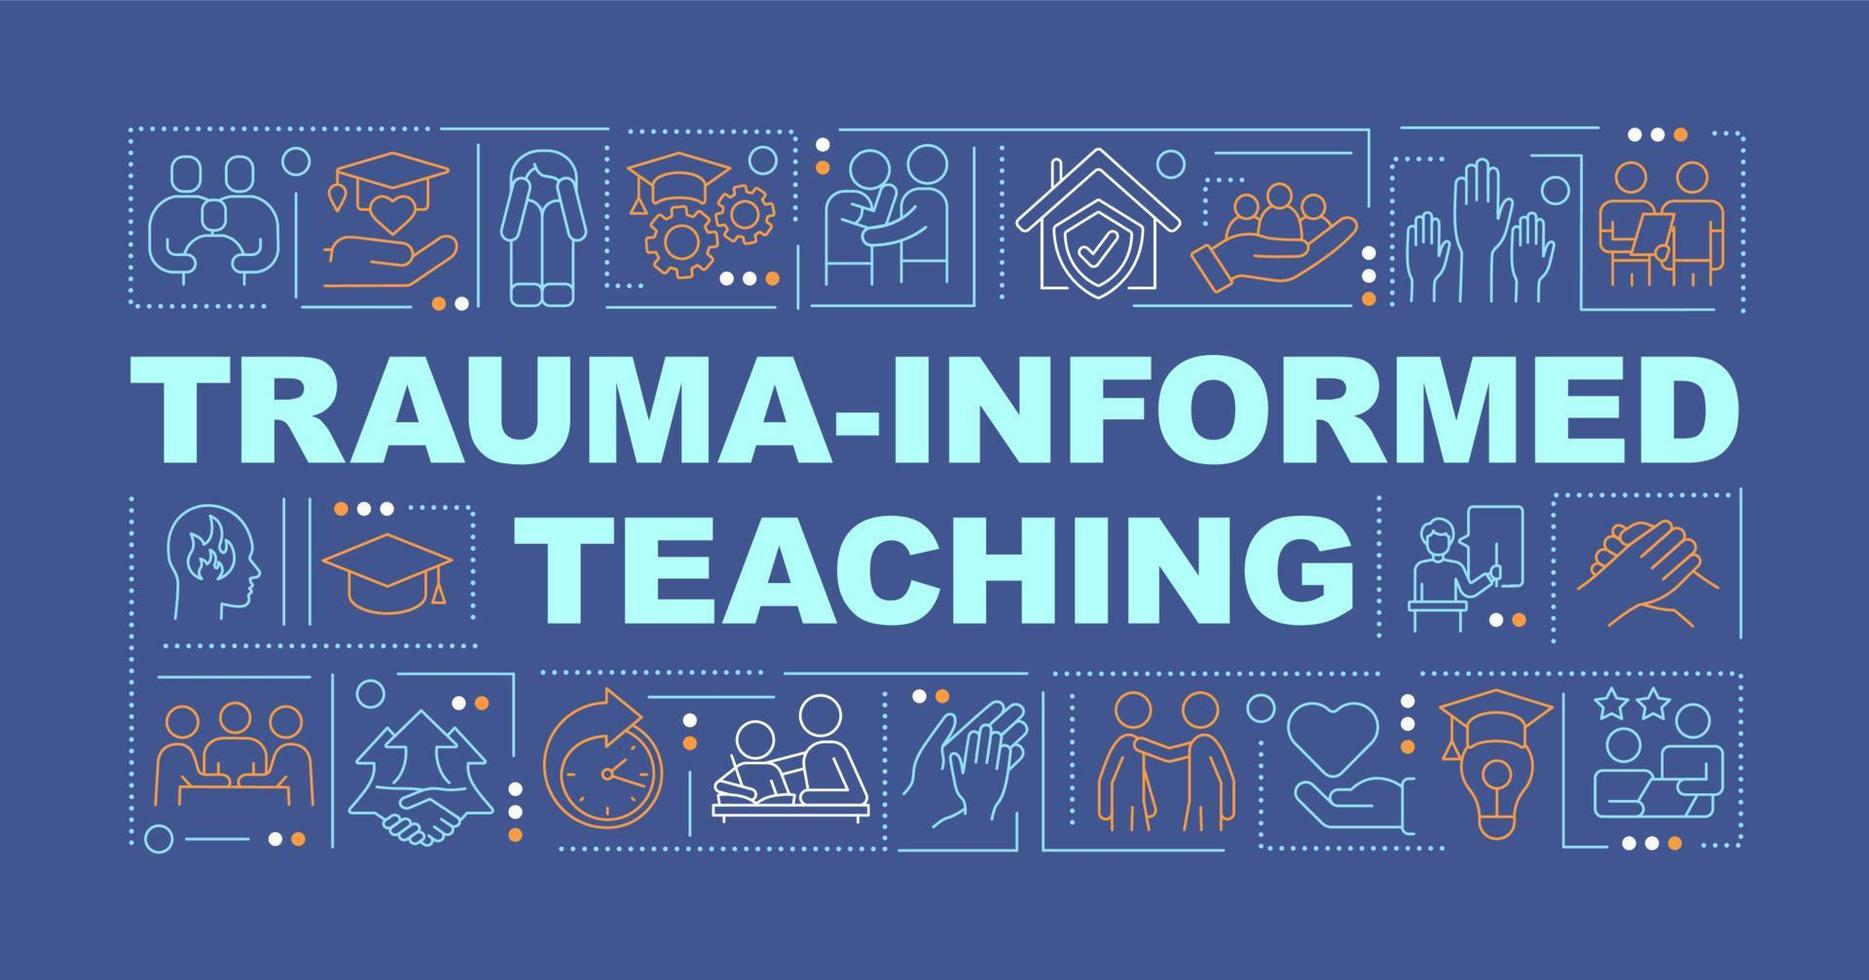 Trauma informed teaching word concepts dark blue banner. Education trend. Infographics with icons on color background. Isolated typography. Vector illustration with text.